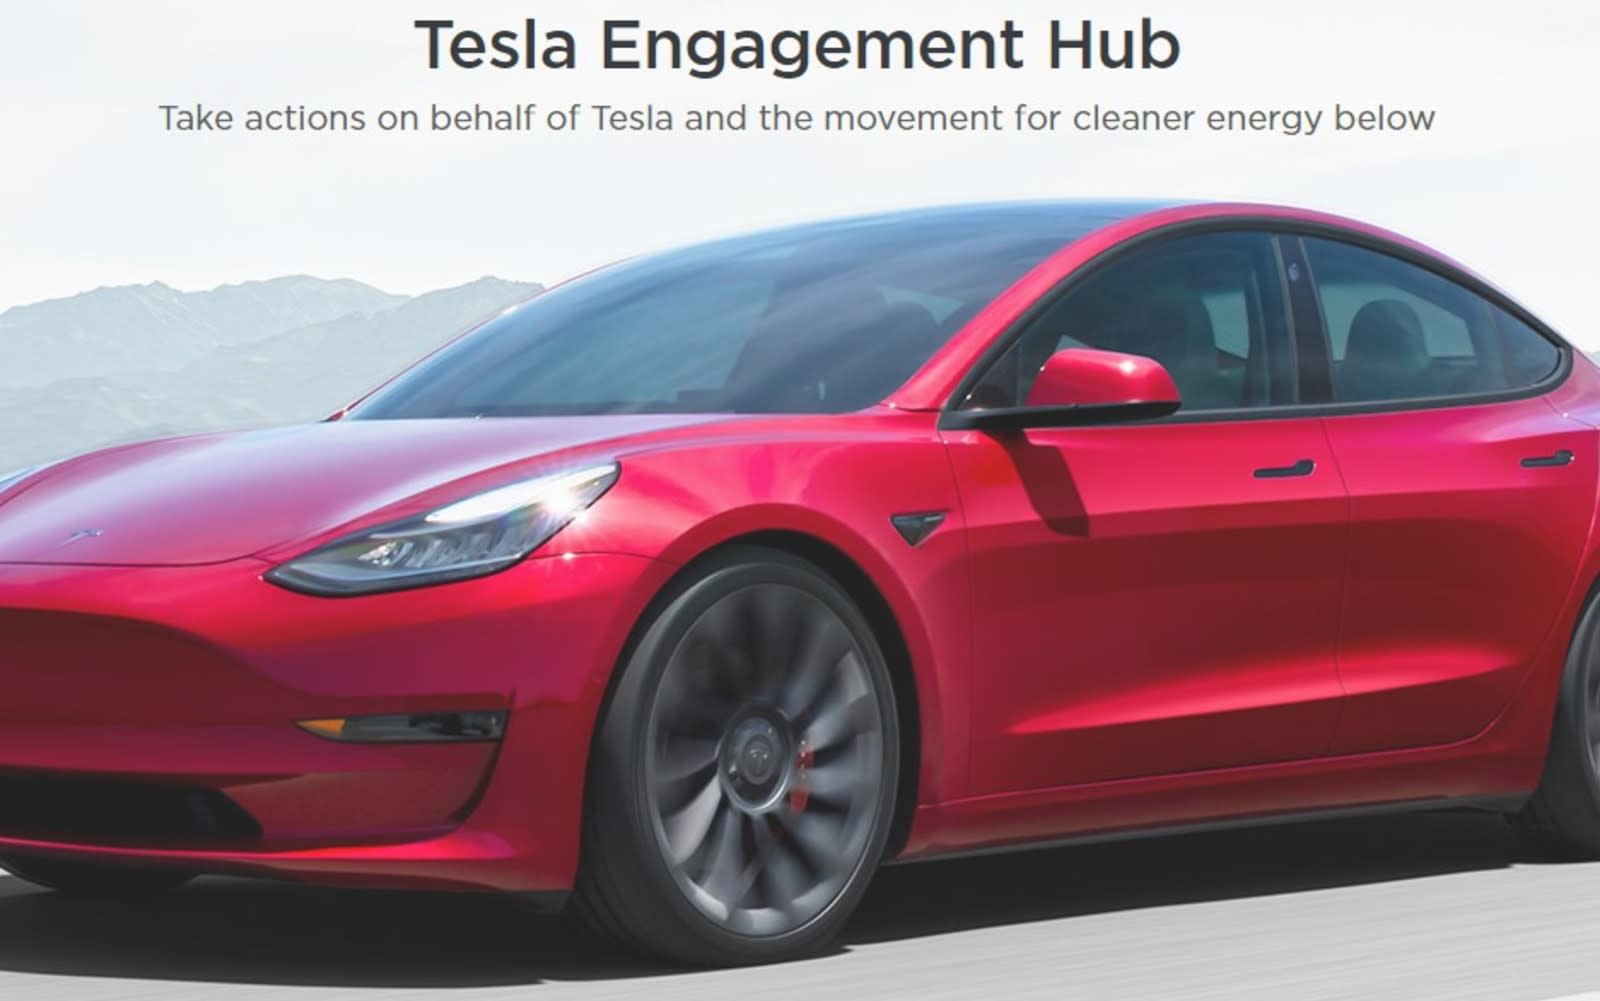 Tesla leaves forums and encourages fans to take political action with Engage